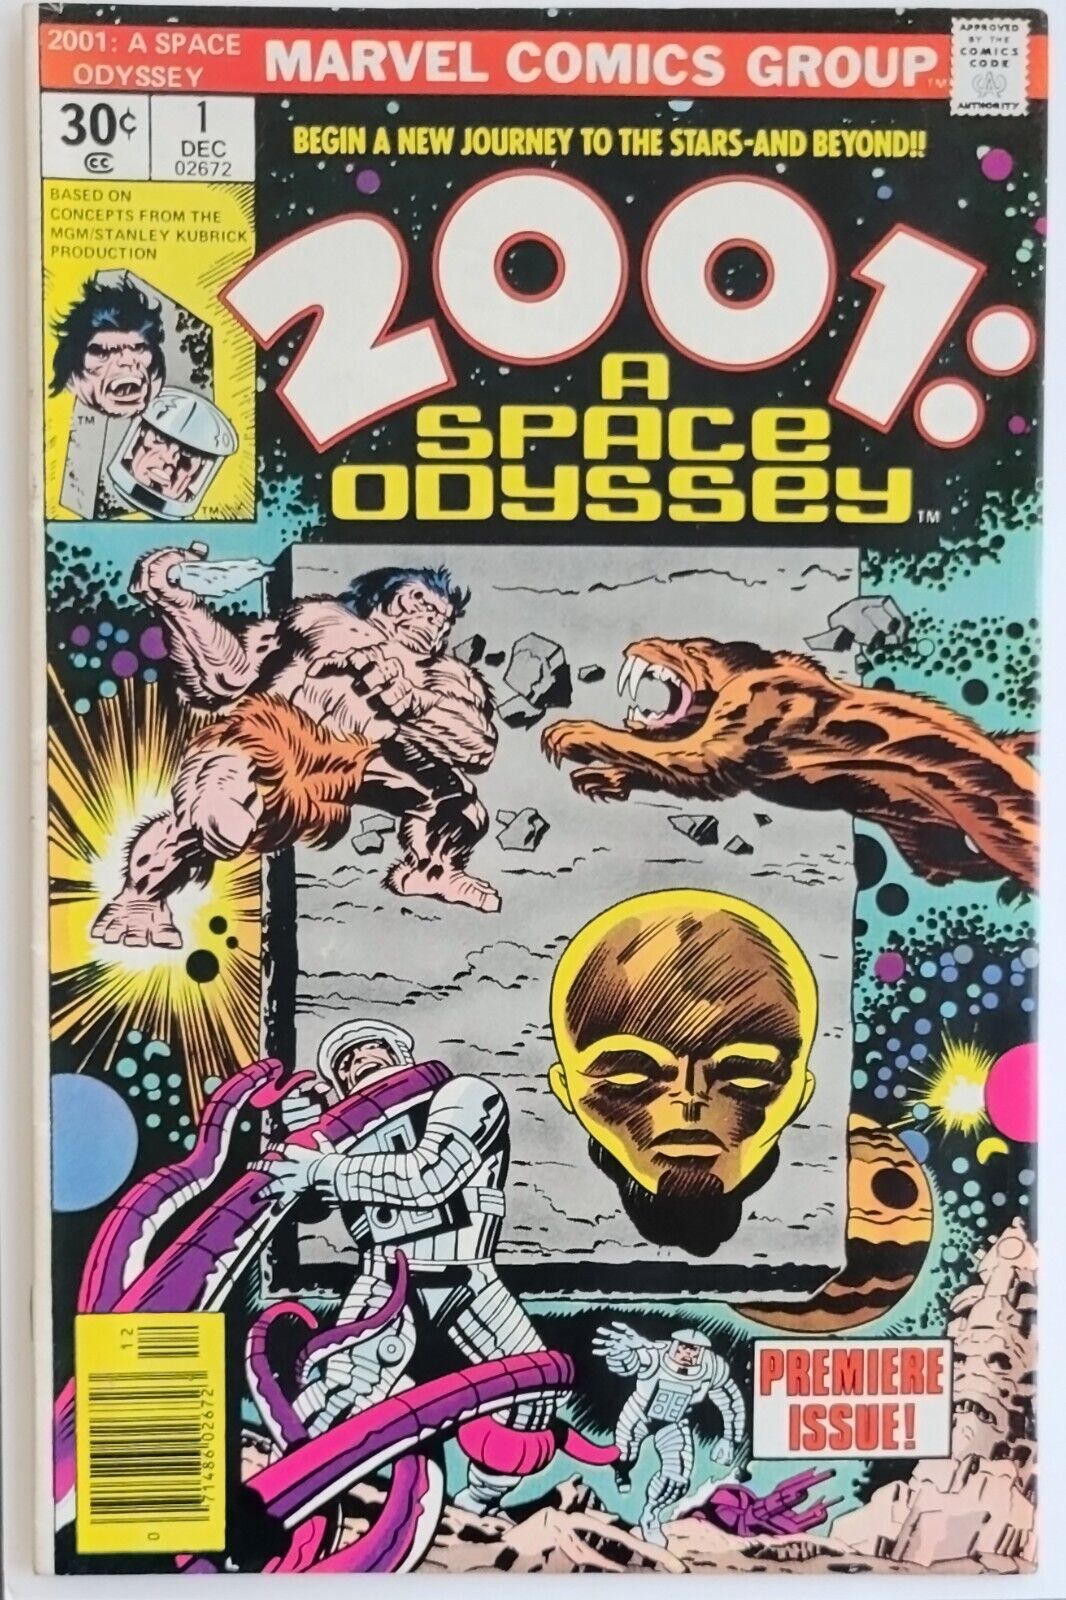 2001: A Space Odyssey #1 (1976) Key Comic Based on Stanley Kubrick SciFi Classic